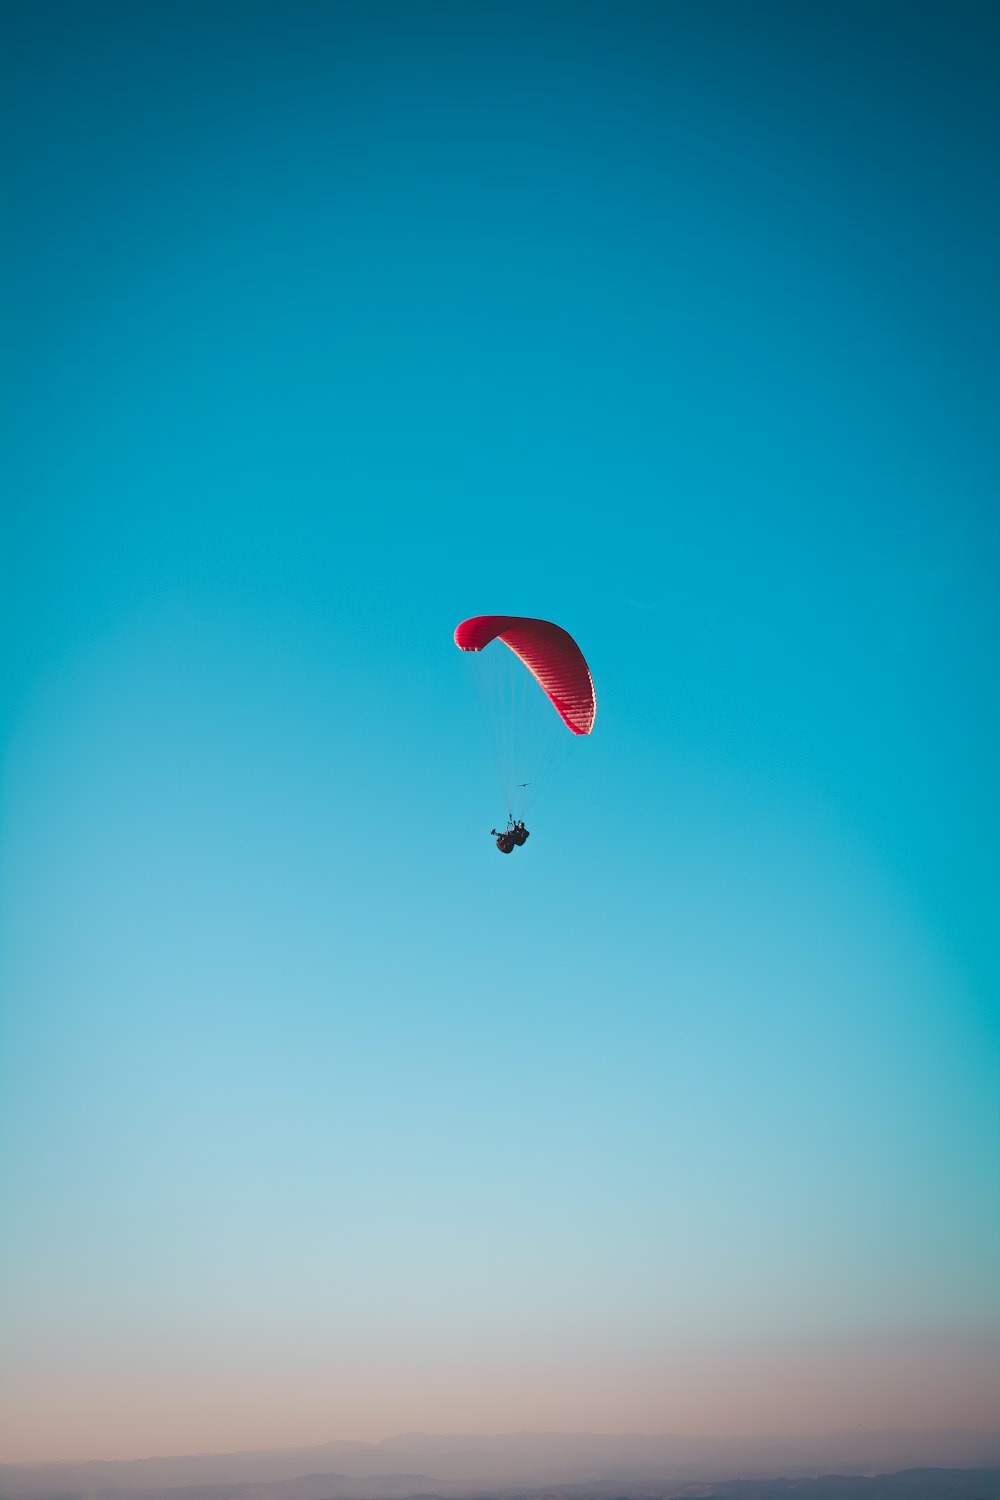 person in red parachute in mid air